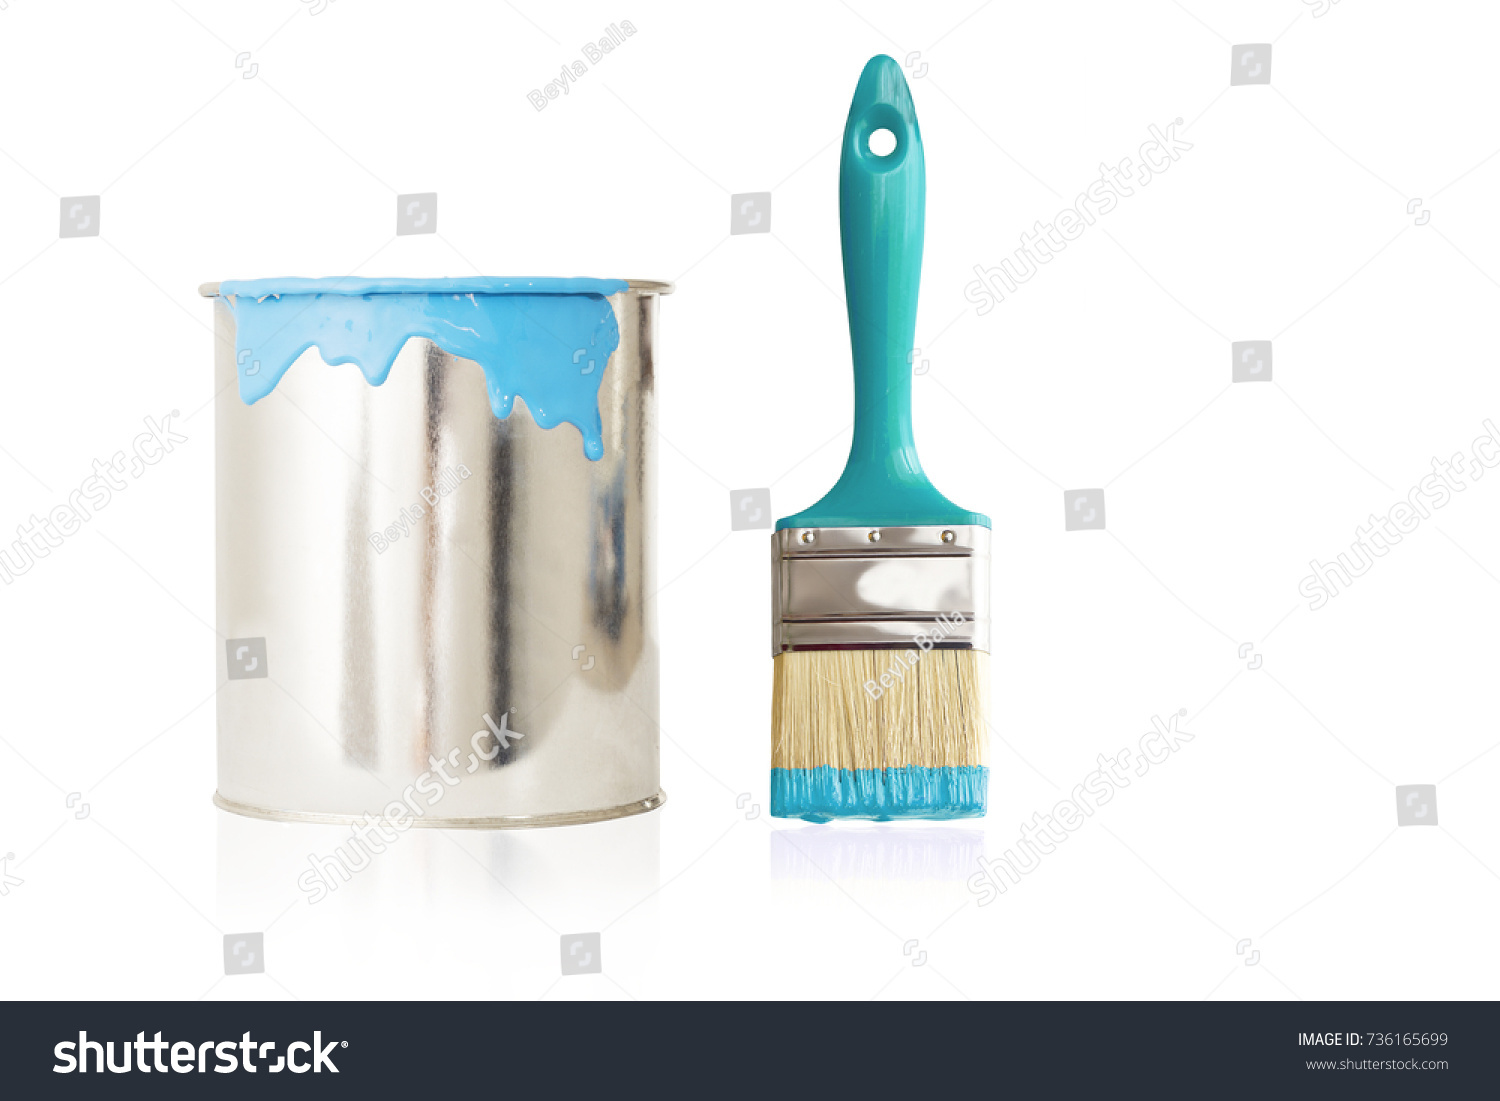 open, painted bucket and paintbrush on a white backdrop. #736165699